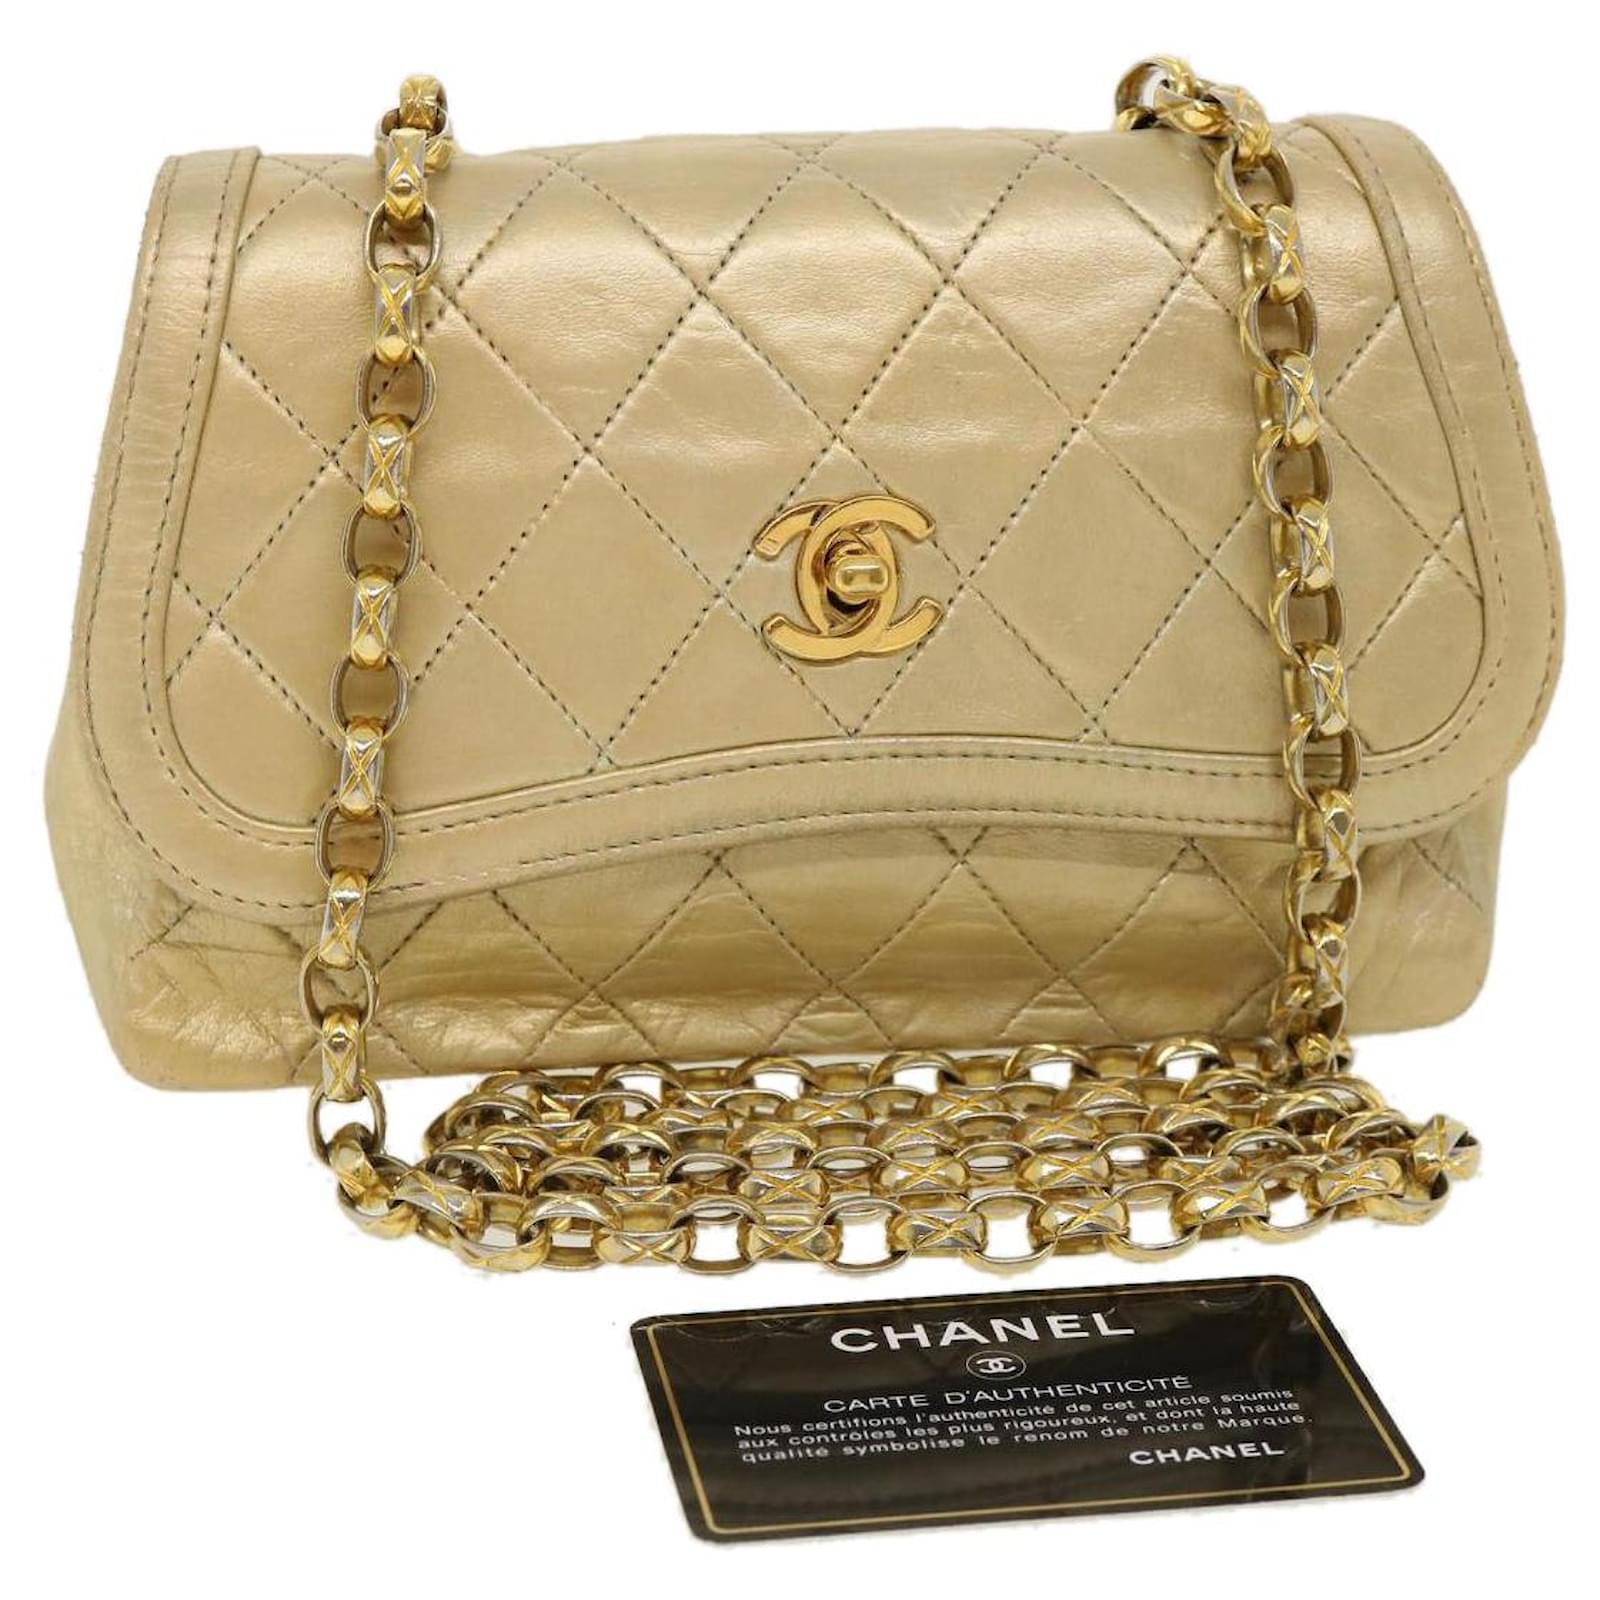 how much chanel purse